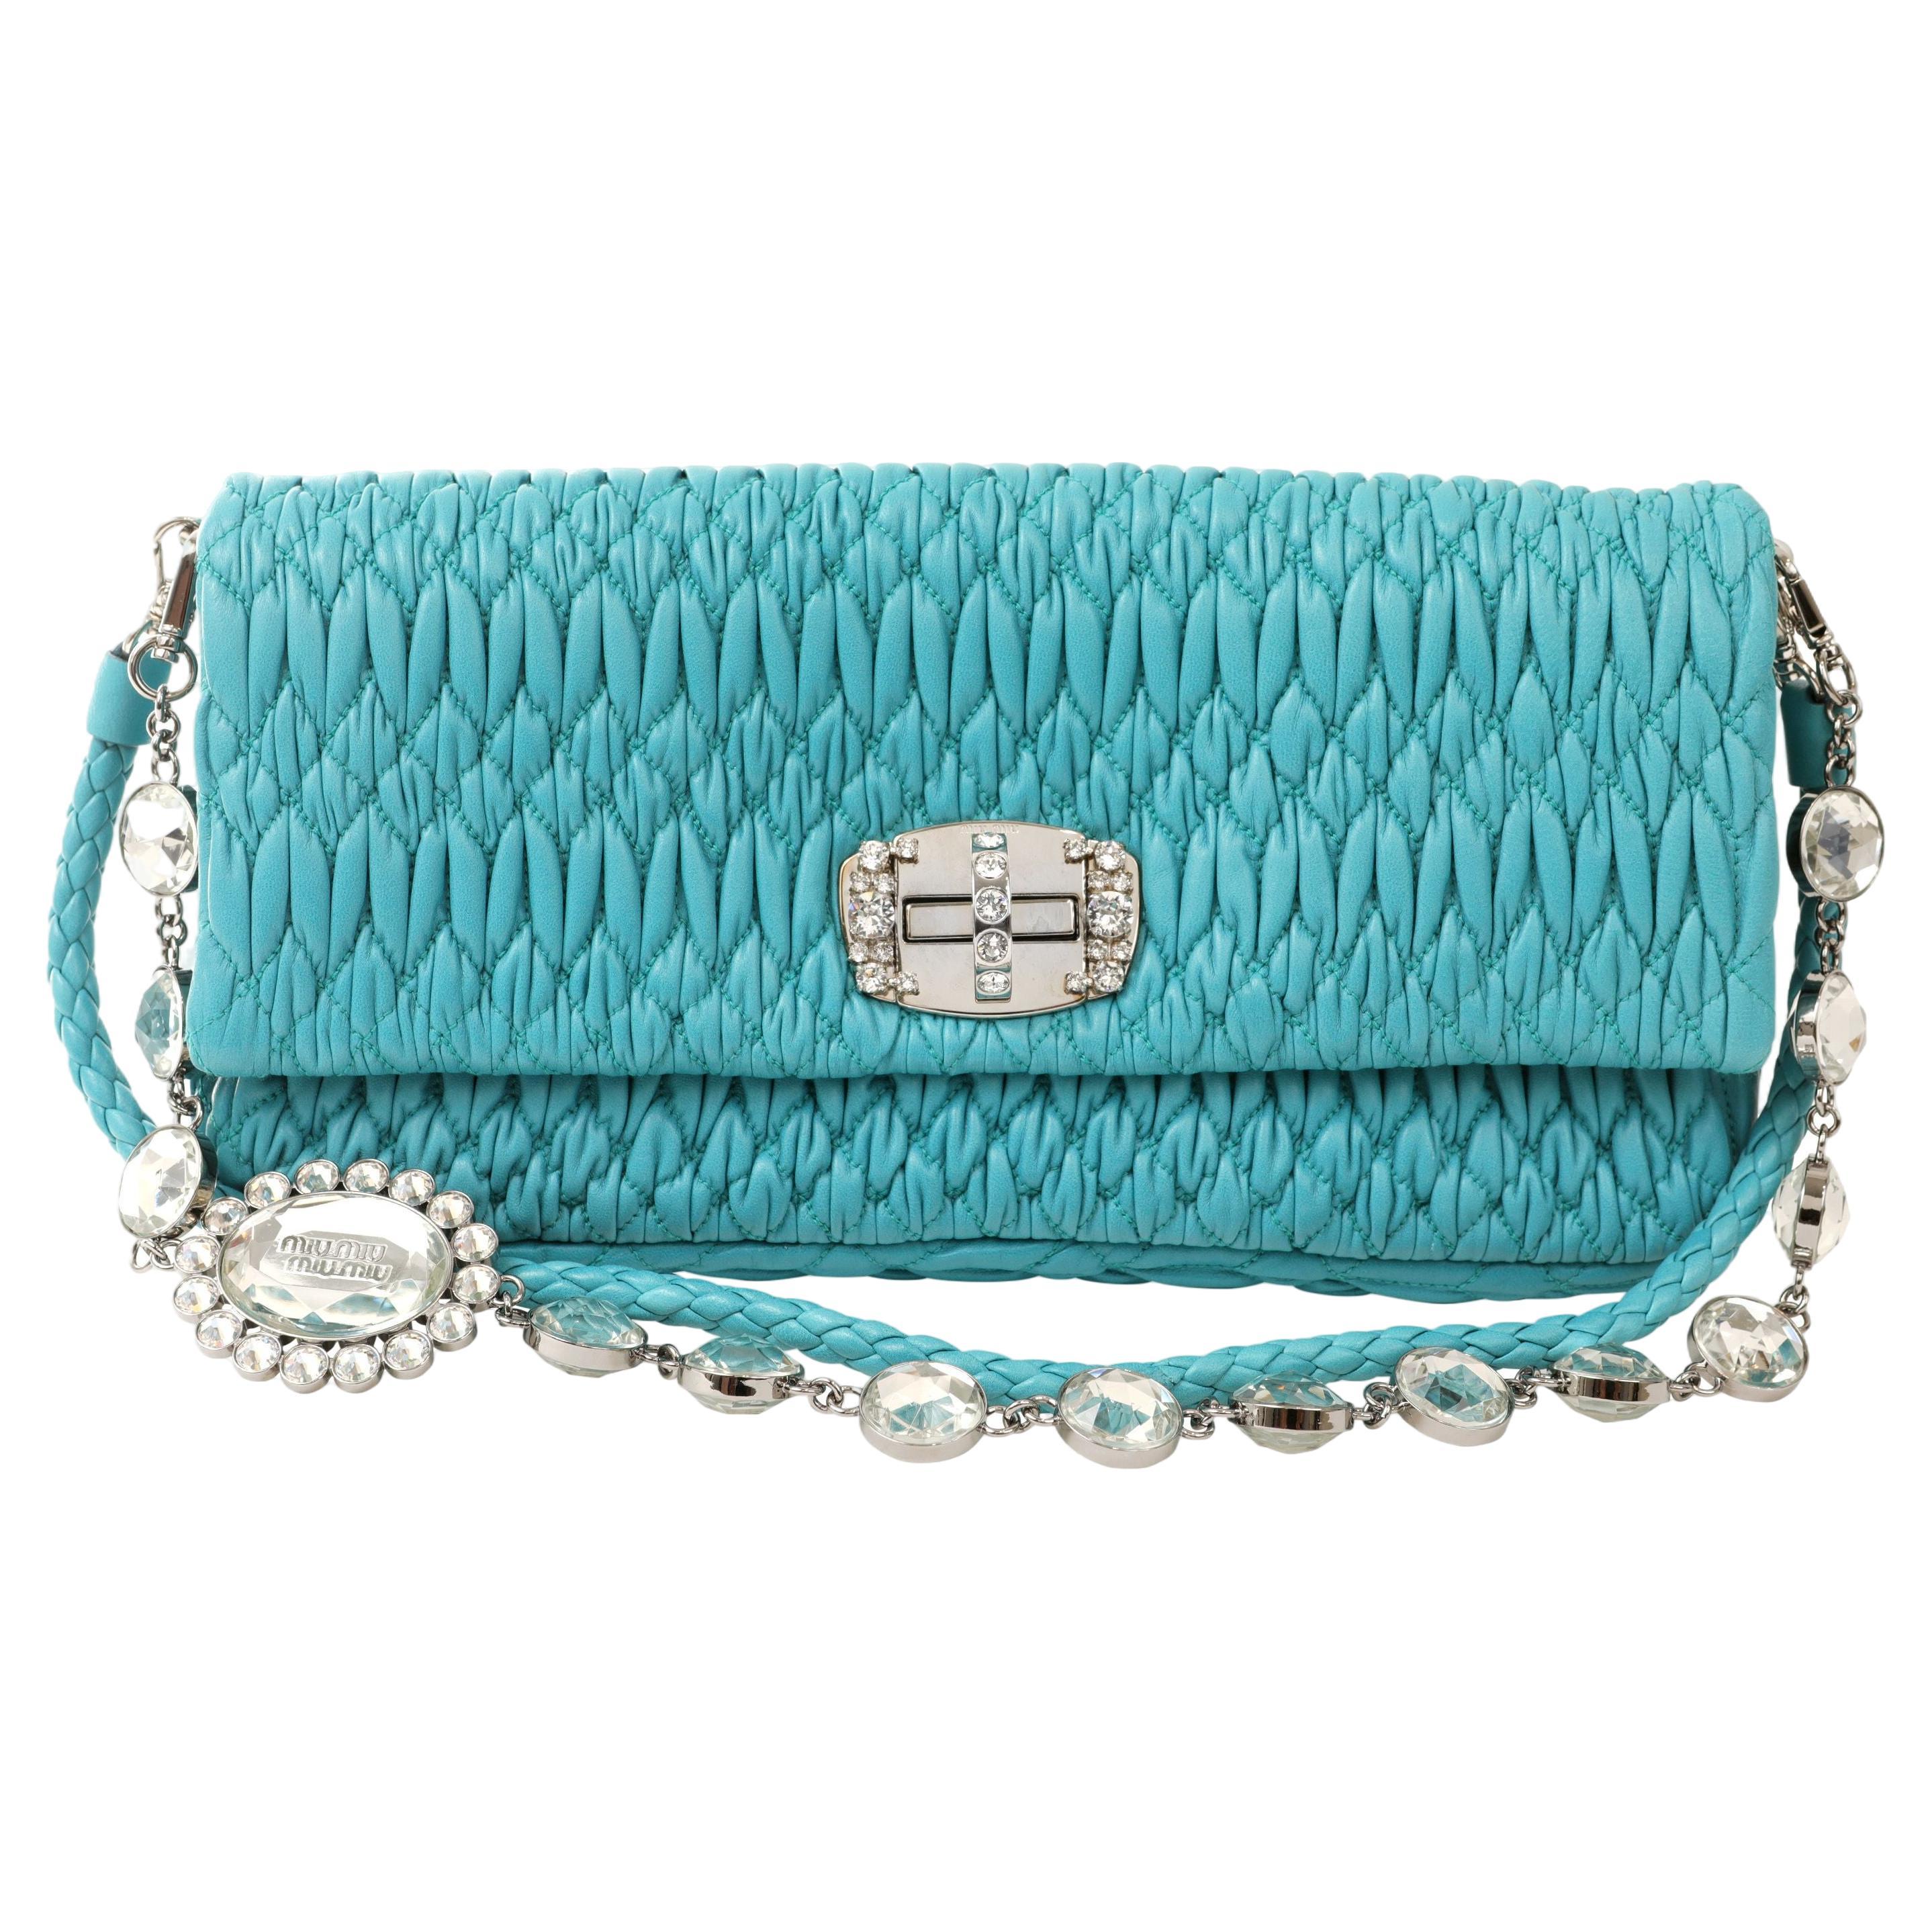 Miu Miu Turquoise Iconic Crystal Cloquè Small Bag with Silver Hardware en vente